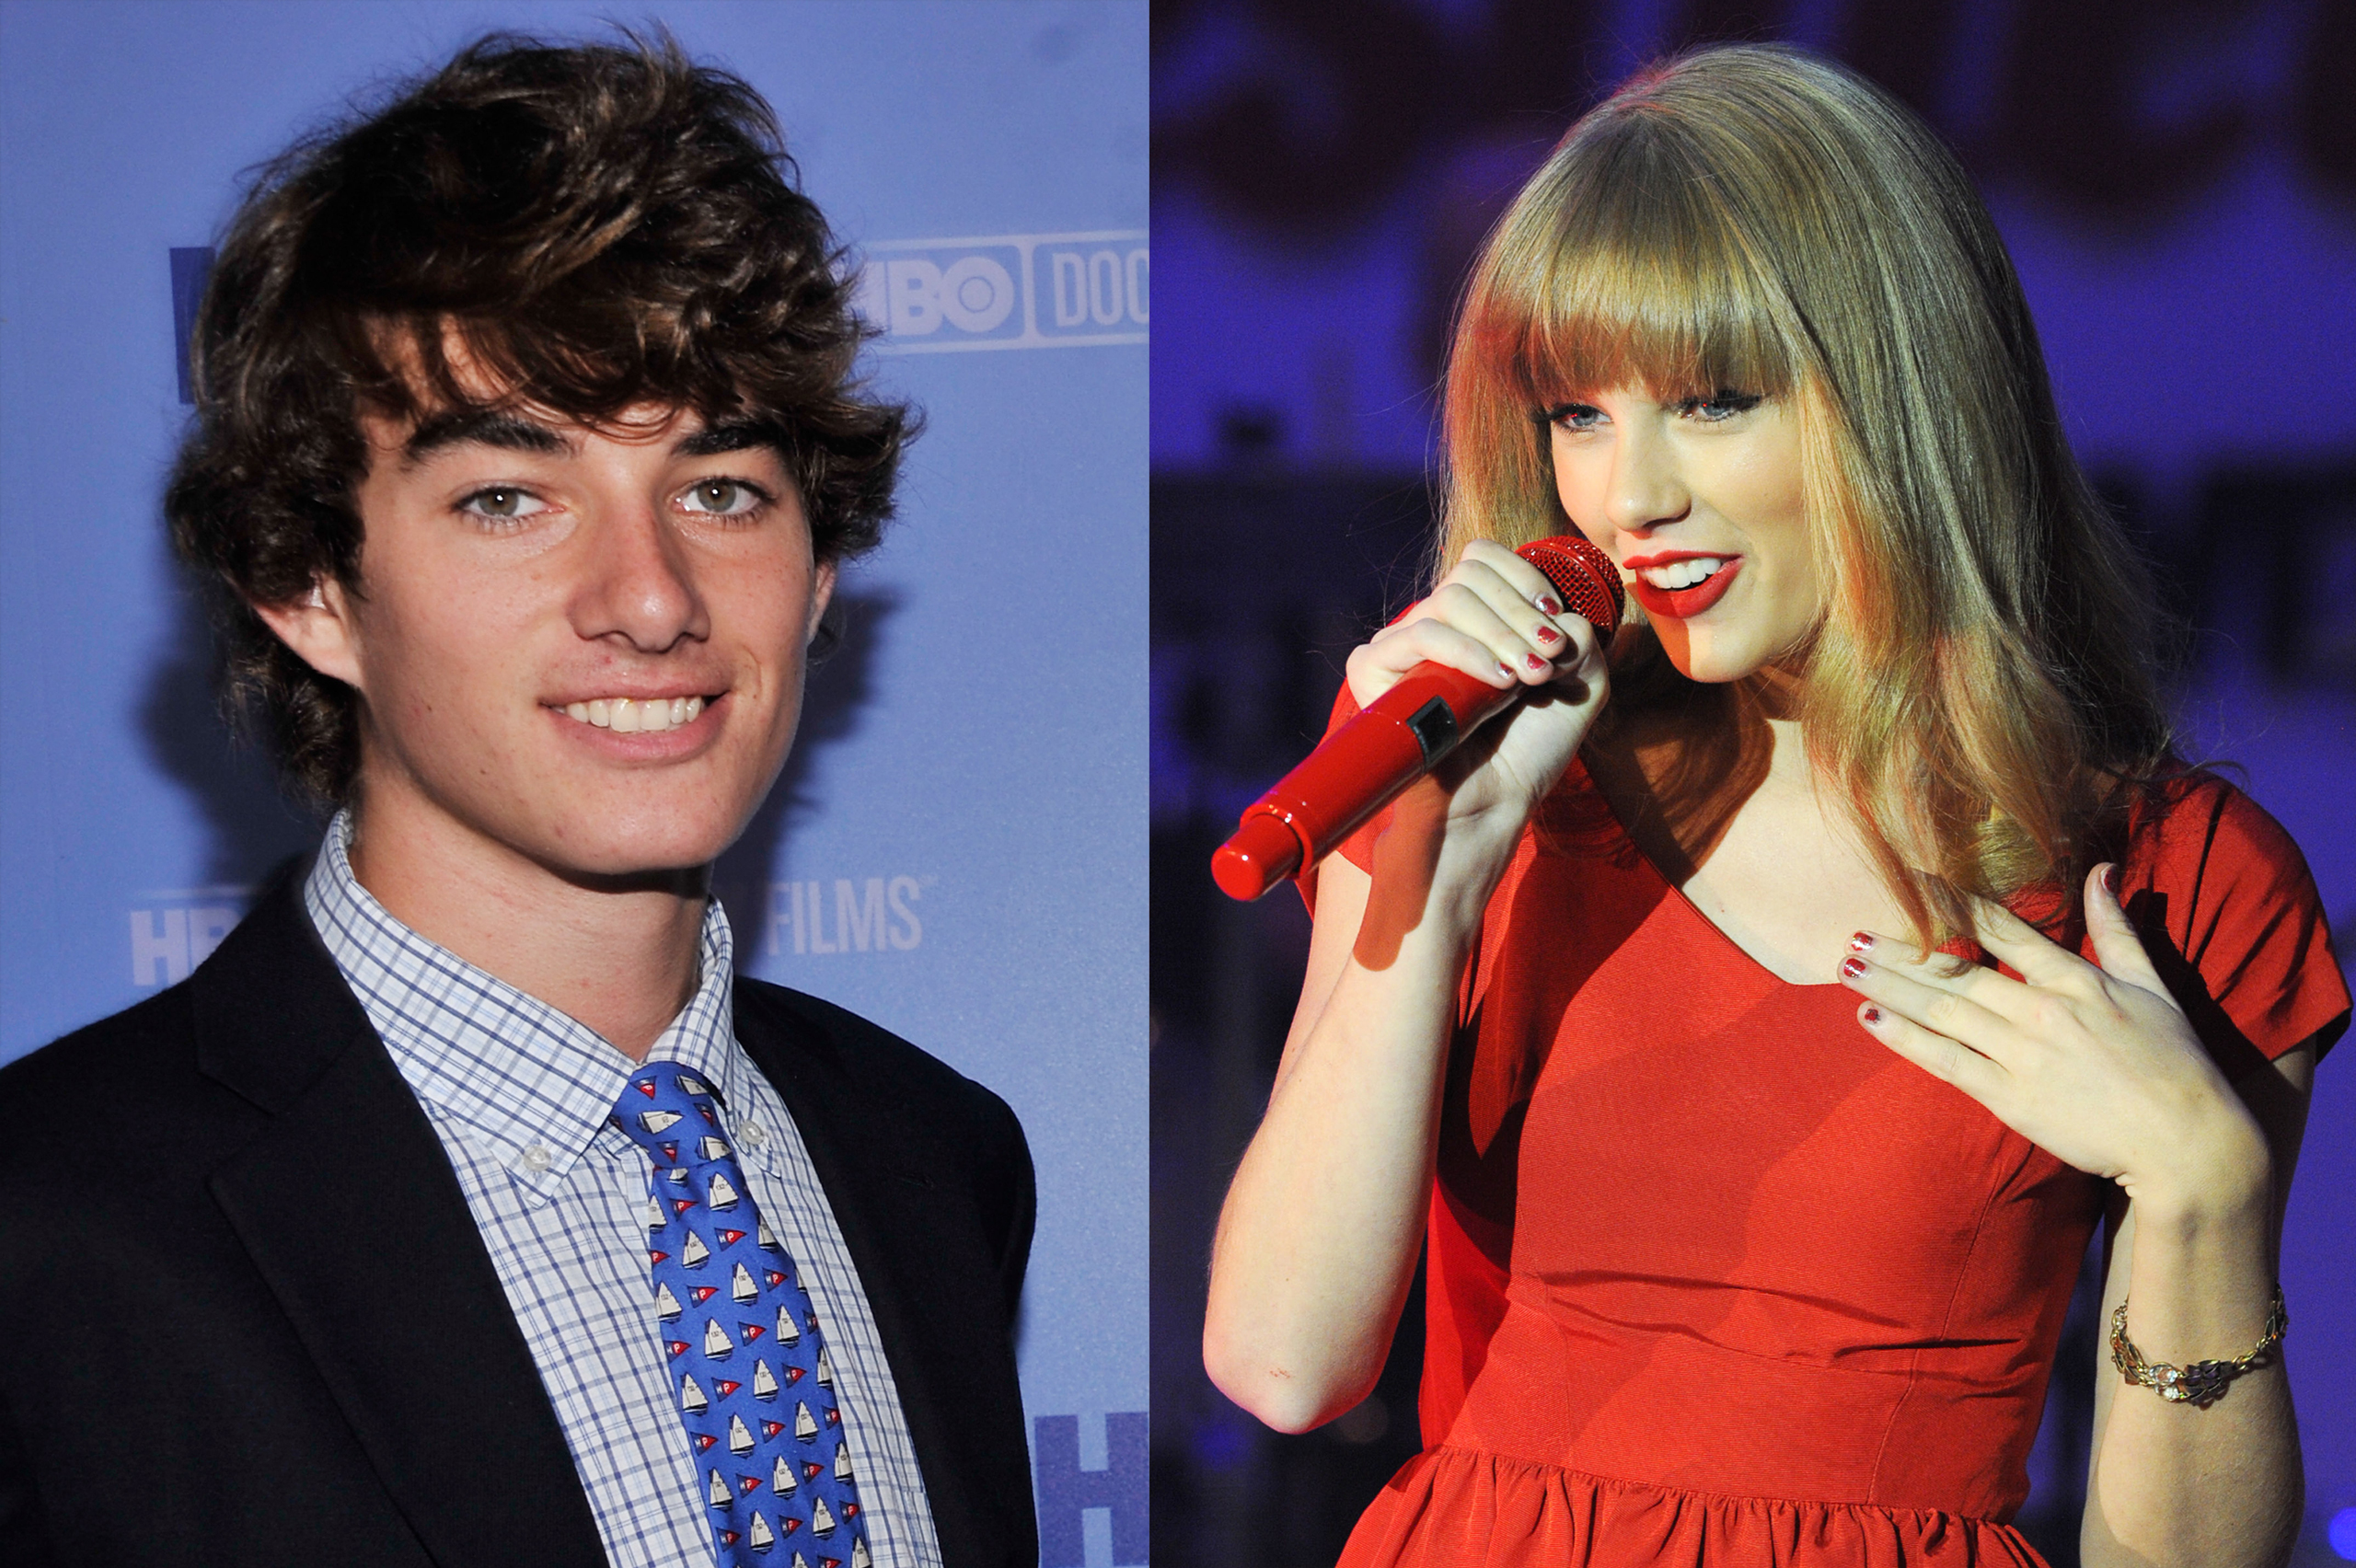 Taylor Swift performs at the switch on of the 2012 Christmas lights at Westfield in London on Nov. 6, 2012; Conor Kennedy attends the "Ethel" New York Premiere at the Time Warner Center in New York on Oct. 15, 2012. (Dave J Hogan—Getty Images;Stephen Lovekin—WireImage)